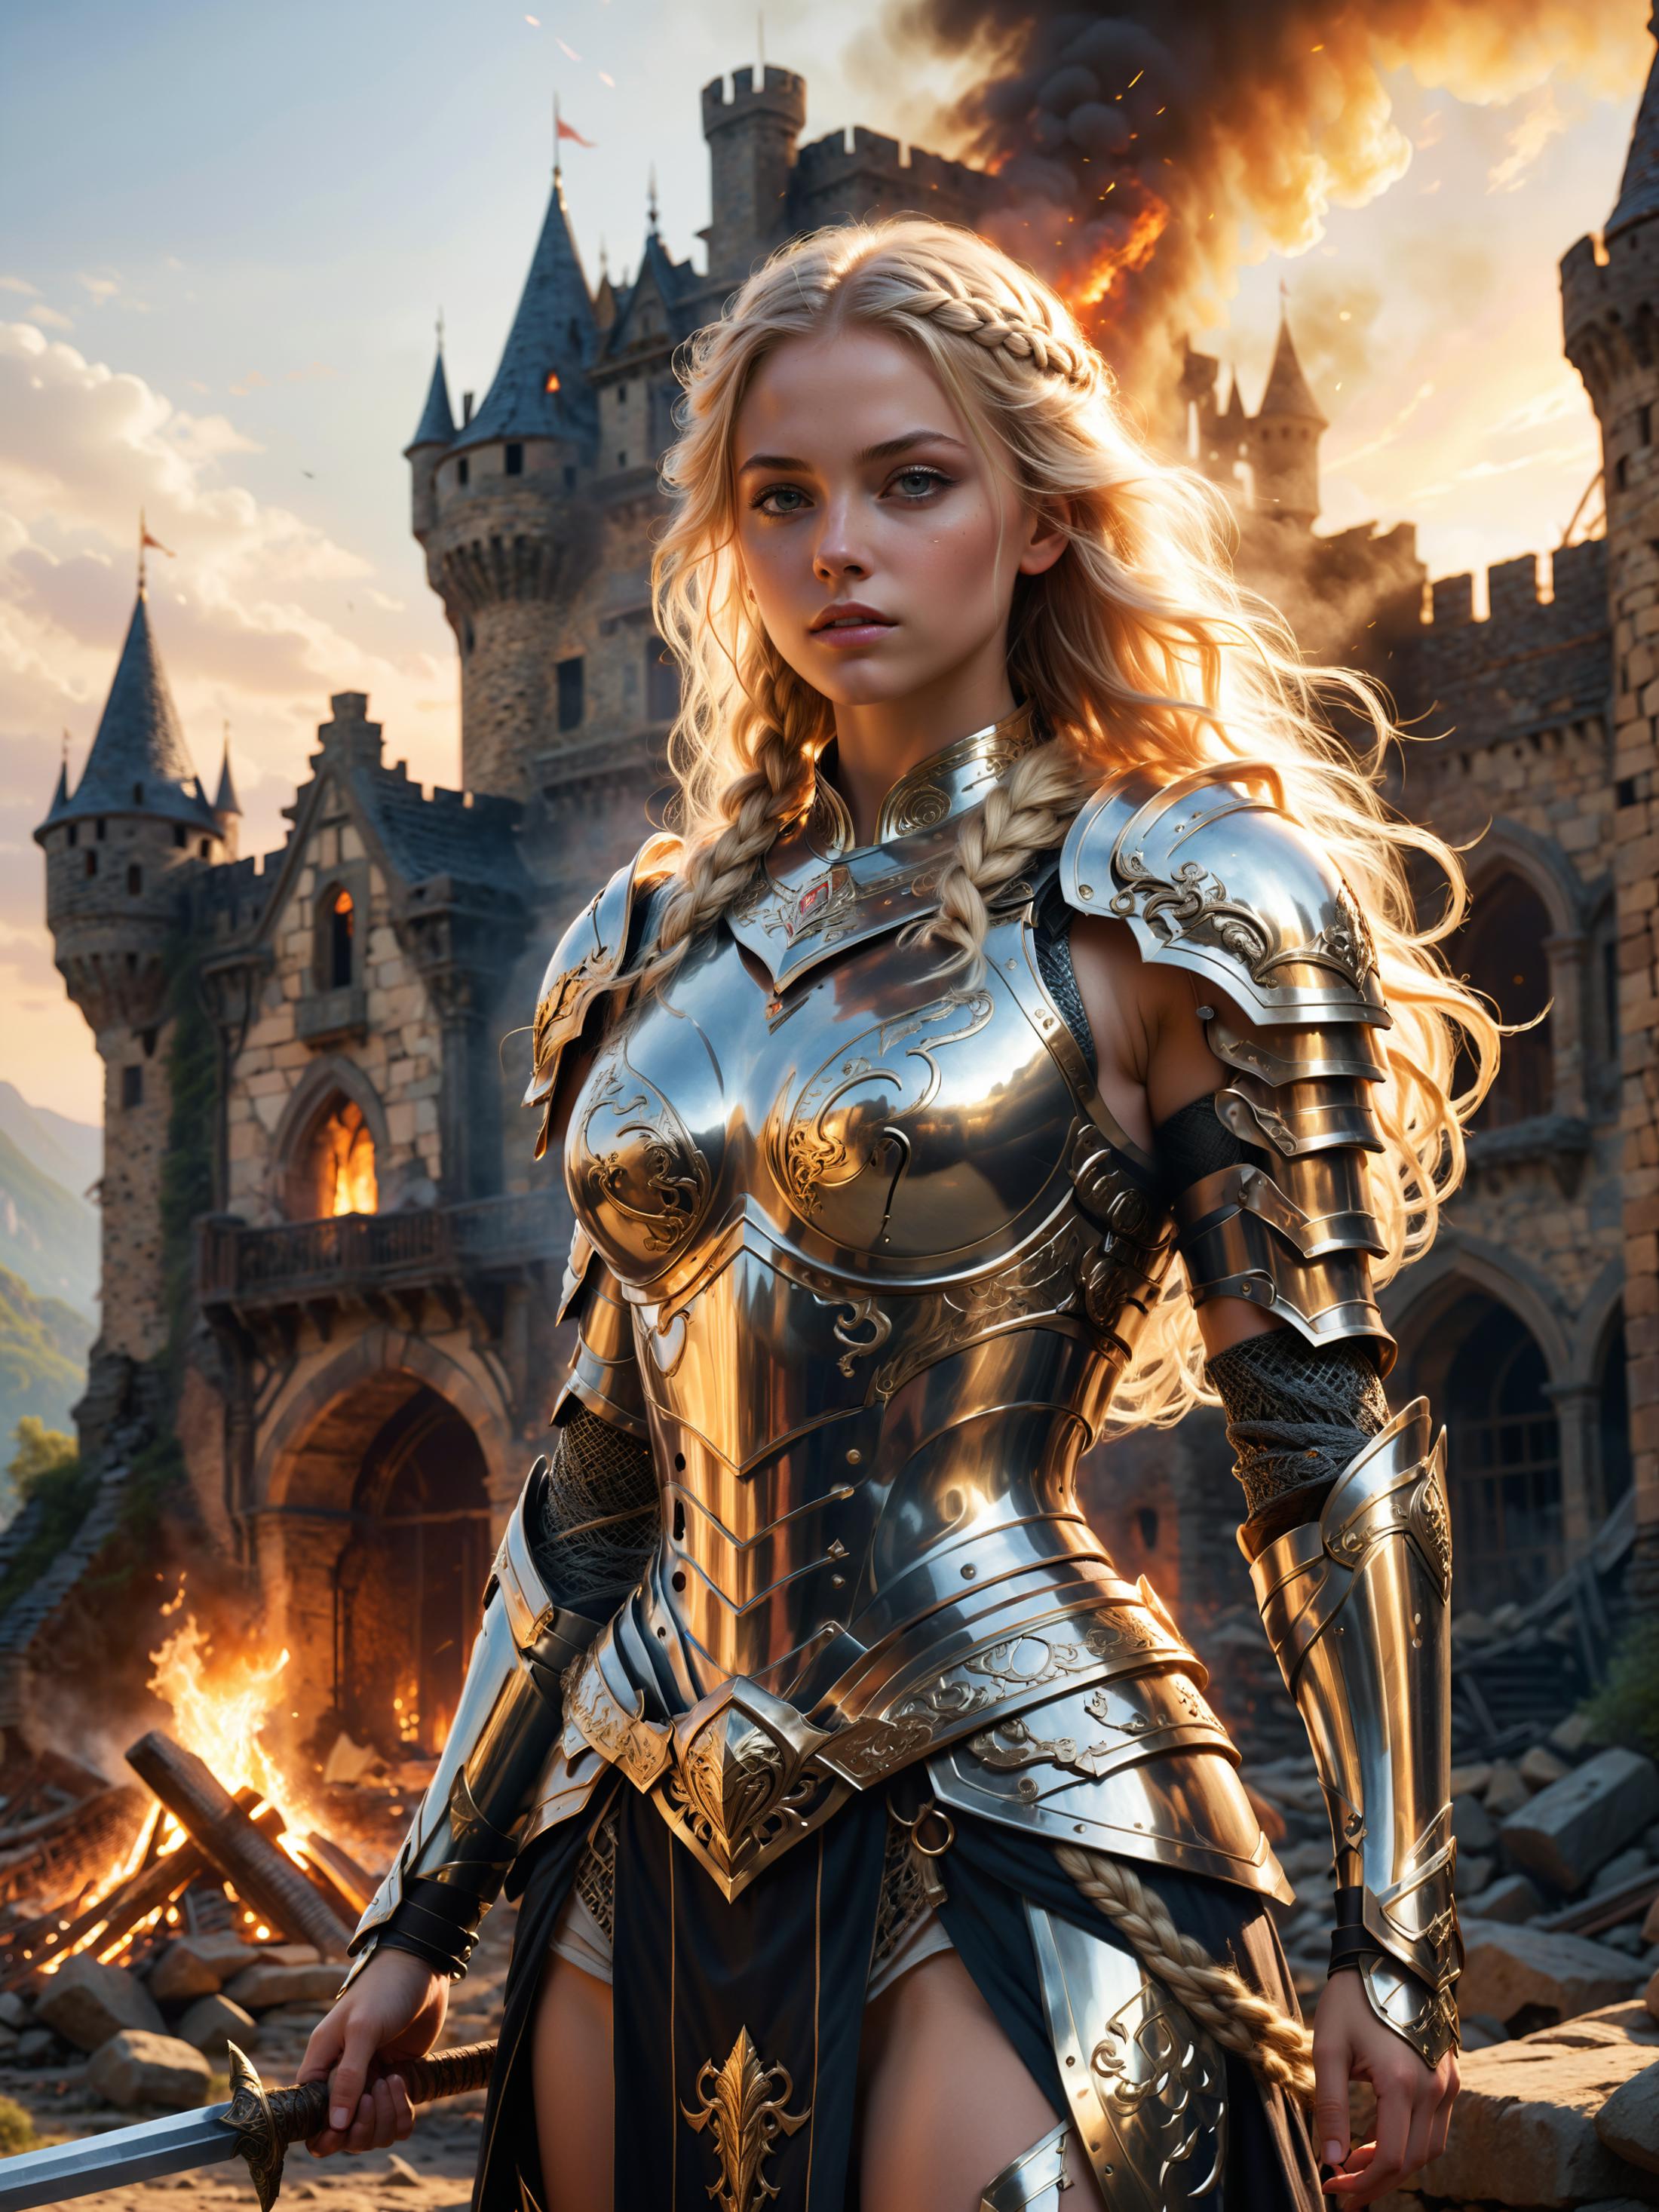 A woman dressed in medieval armor, standing in front of a castle.